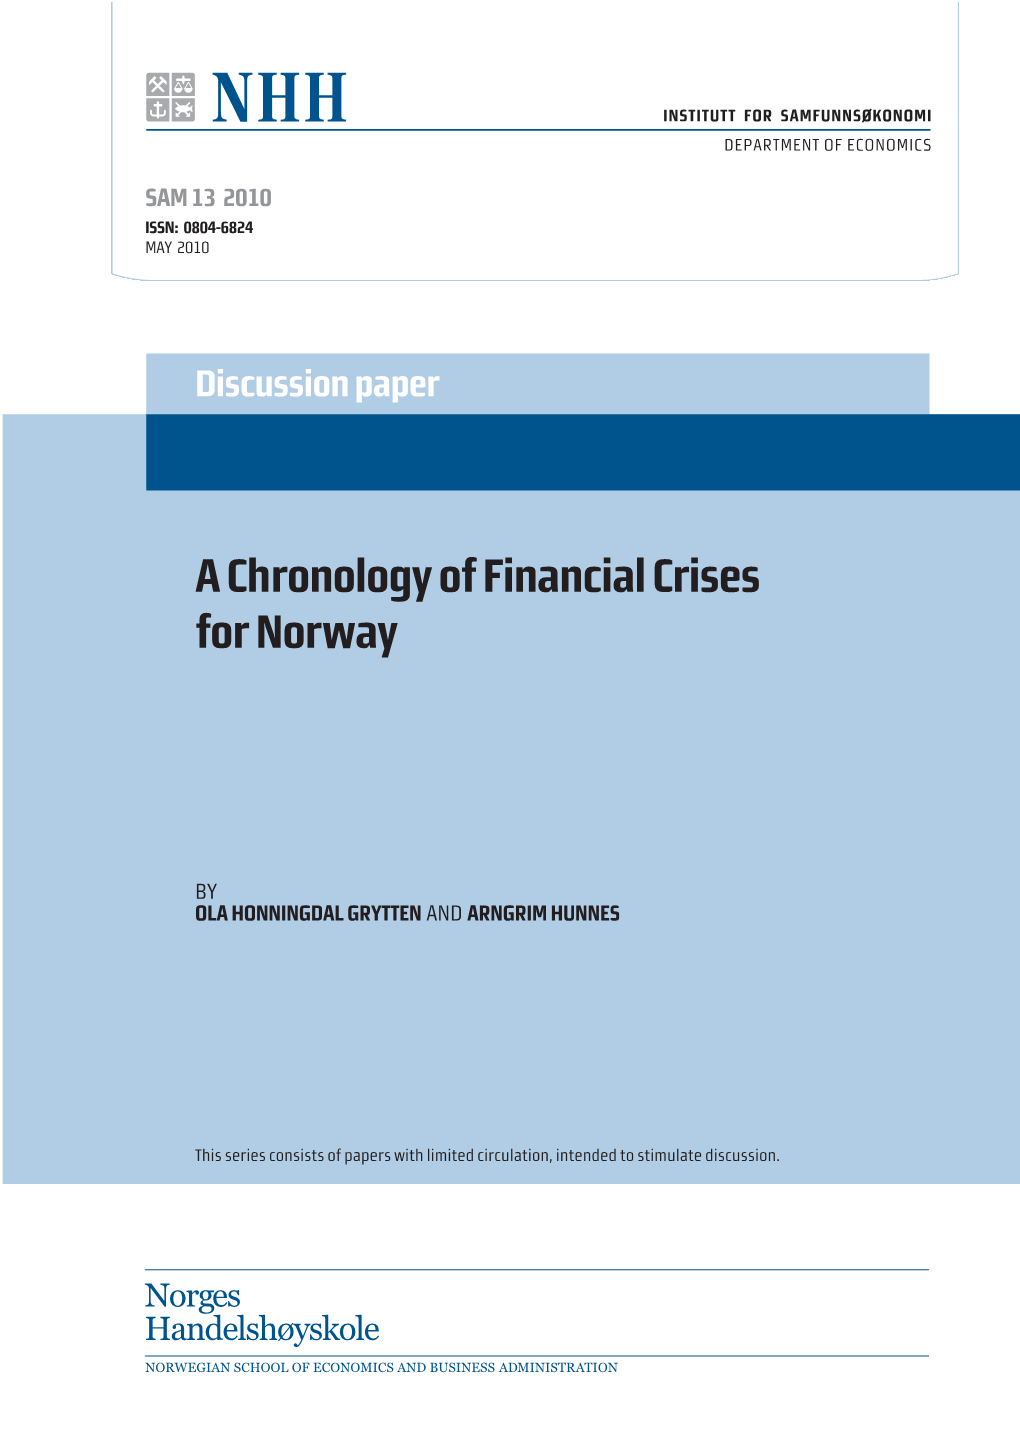 A Chronology of Financial Crises for Norway